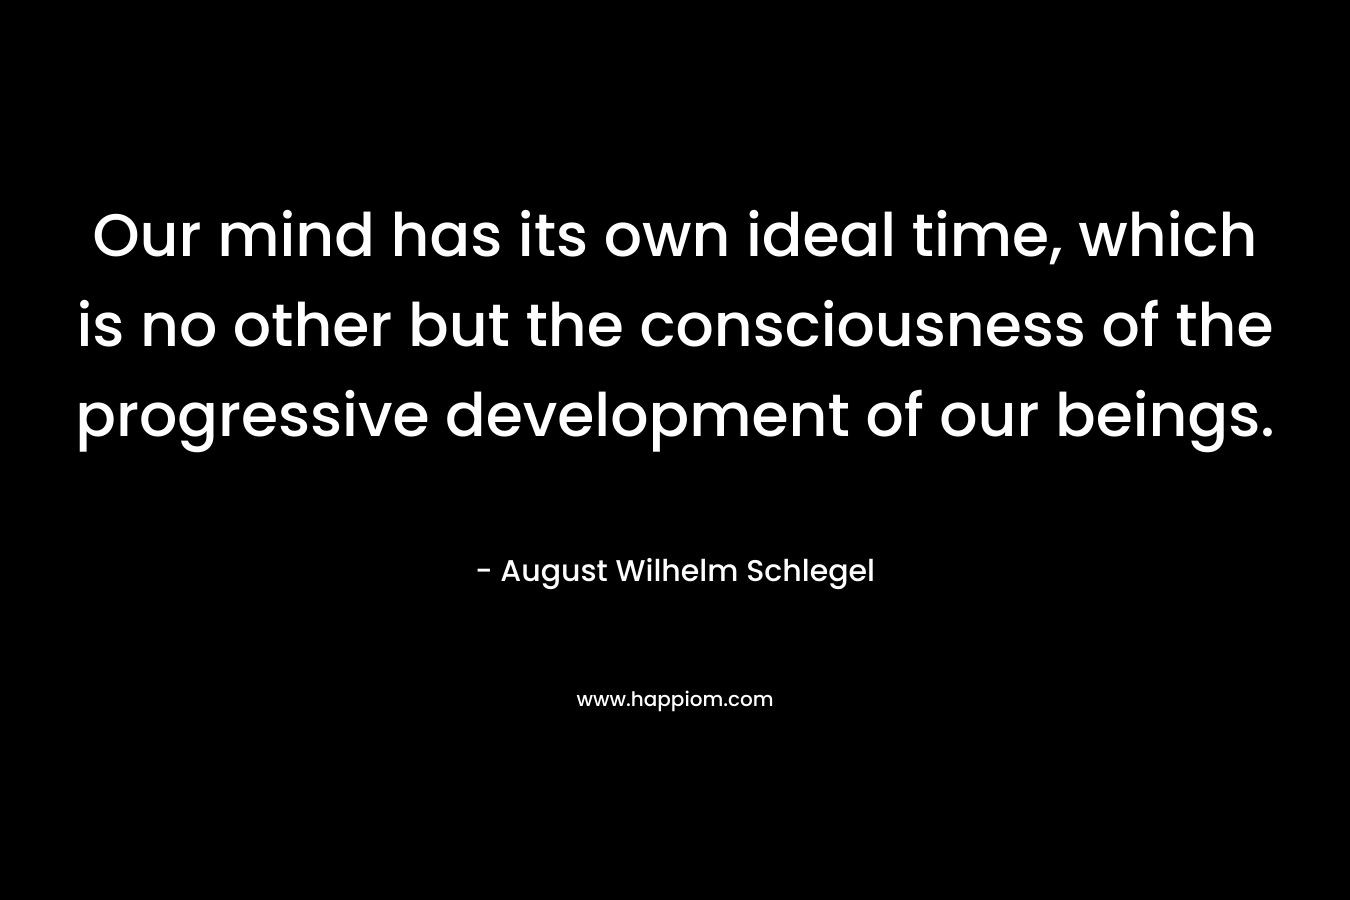 Our mind has its own ideal time, which is no other but the consciousness of the progressive development of our beings.